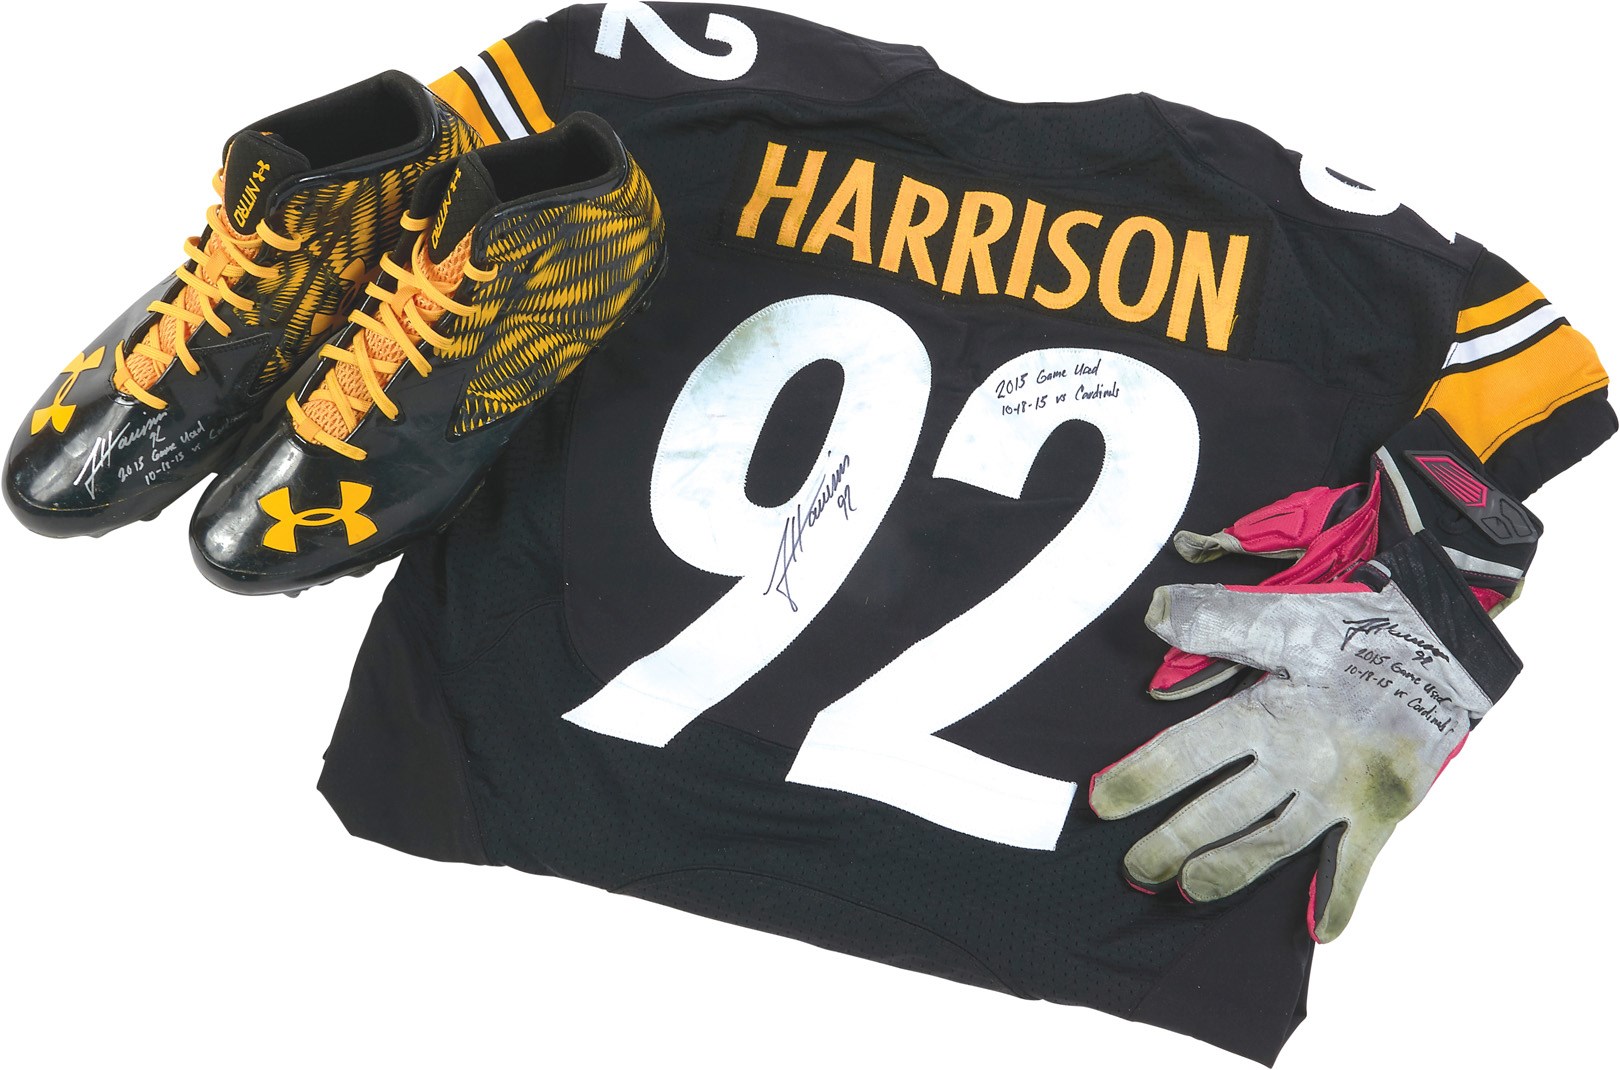 October 18, 2015 James Harrison Pittsburgh Steelers Game Worn Jersey, Cleats and Gloves (Photo-Matched, Harrison Letters)